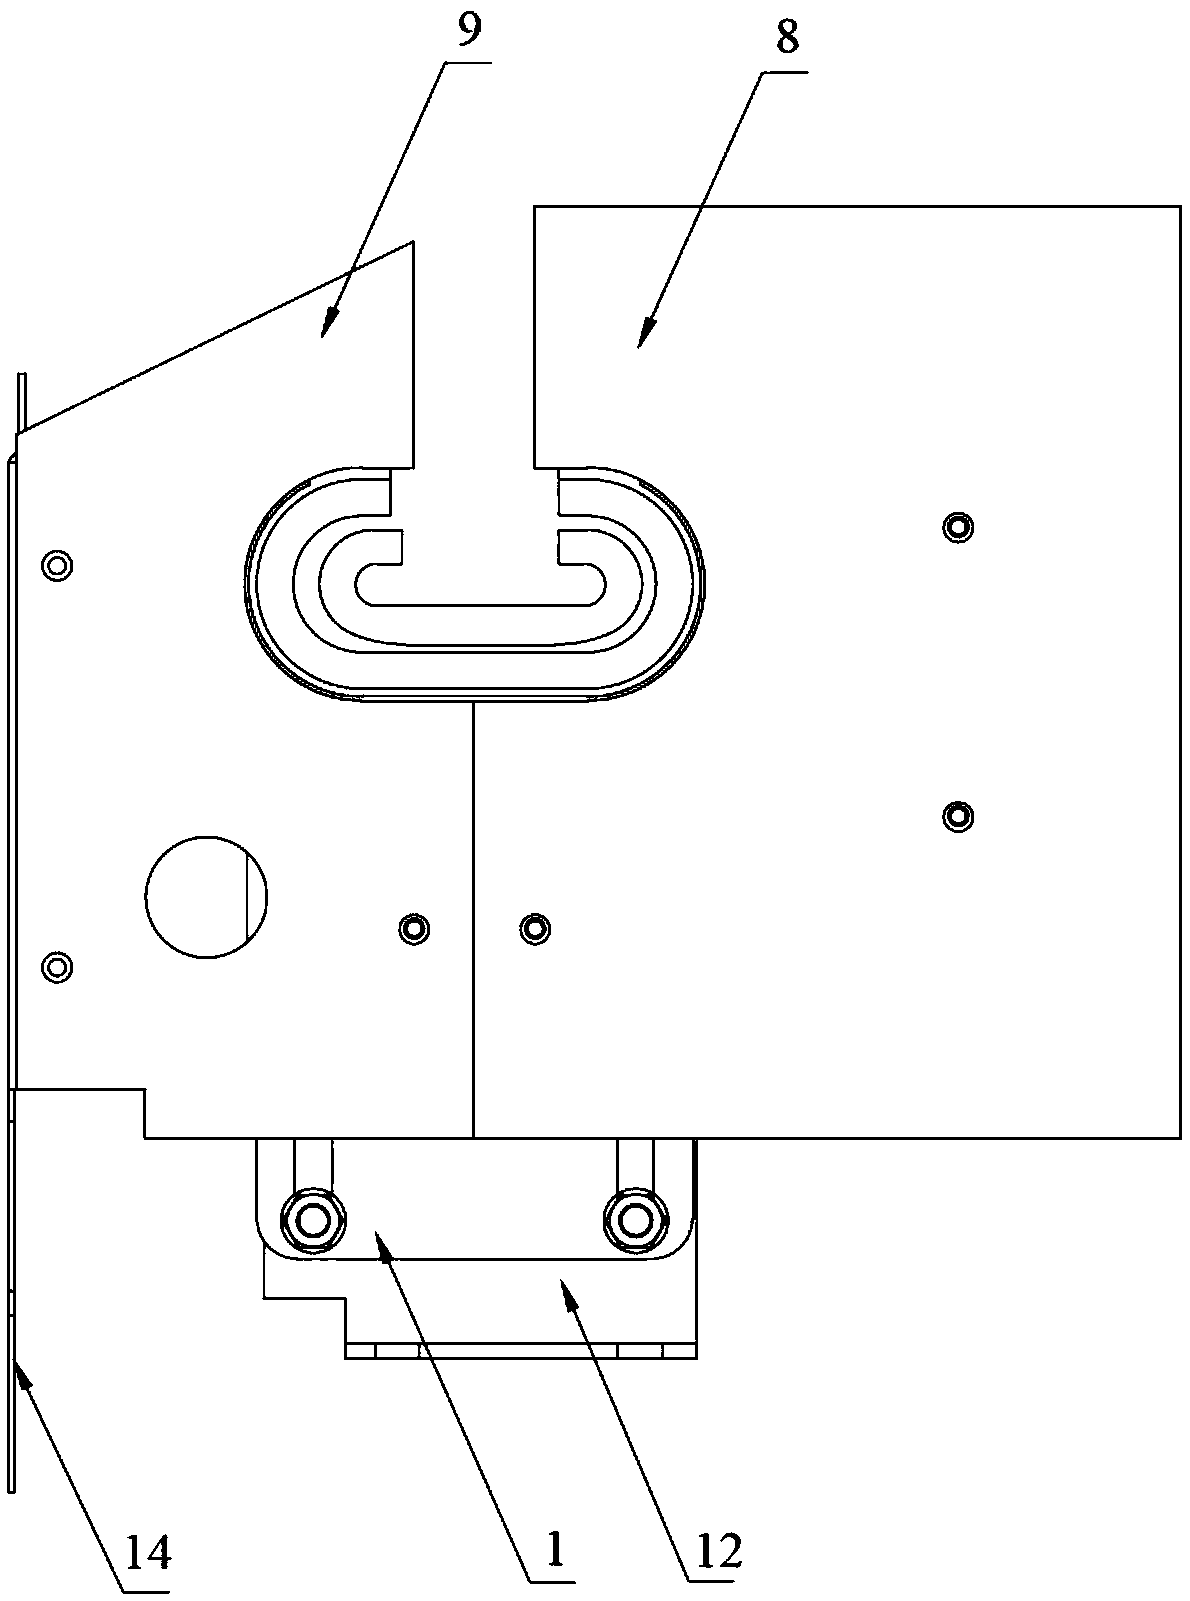 Hand strap outlet and inlet device for escalator